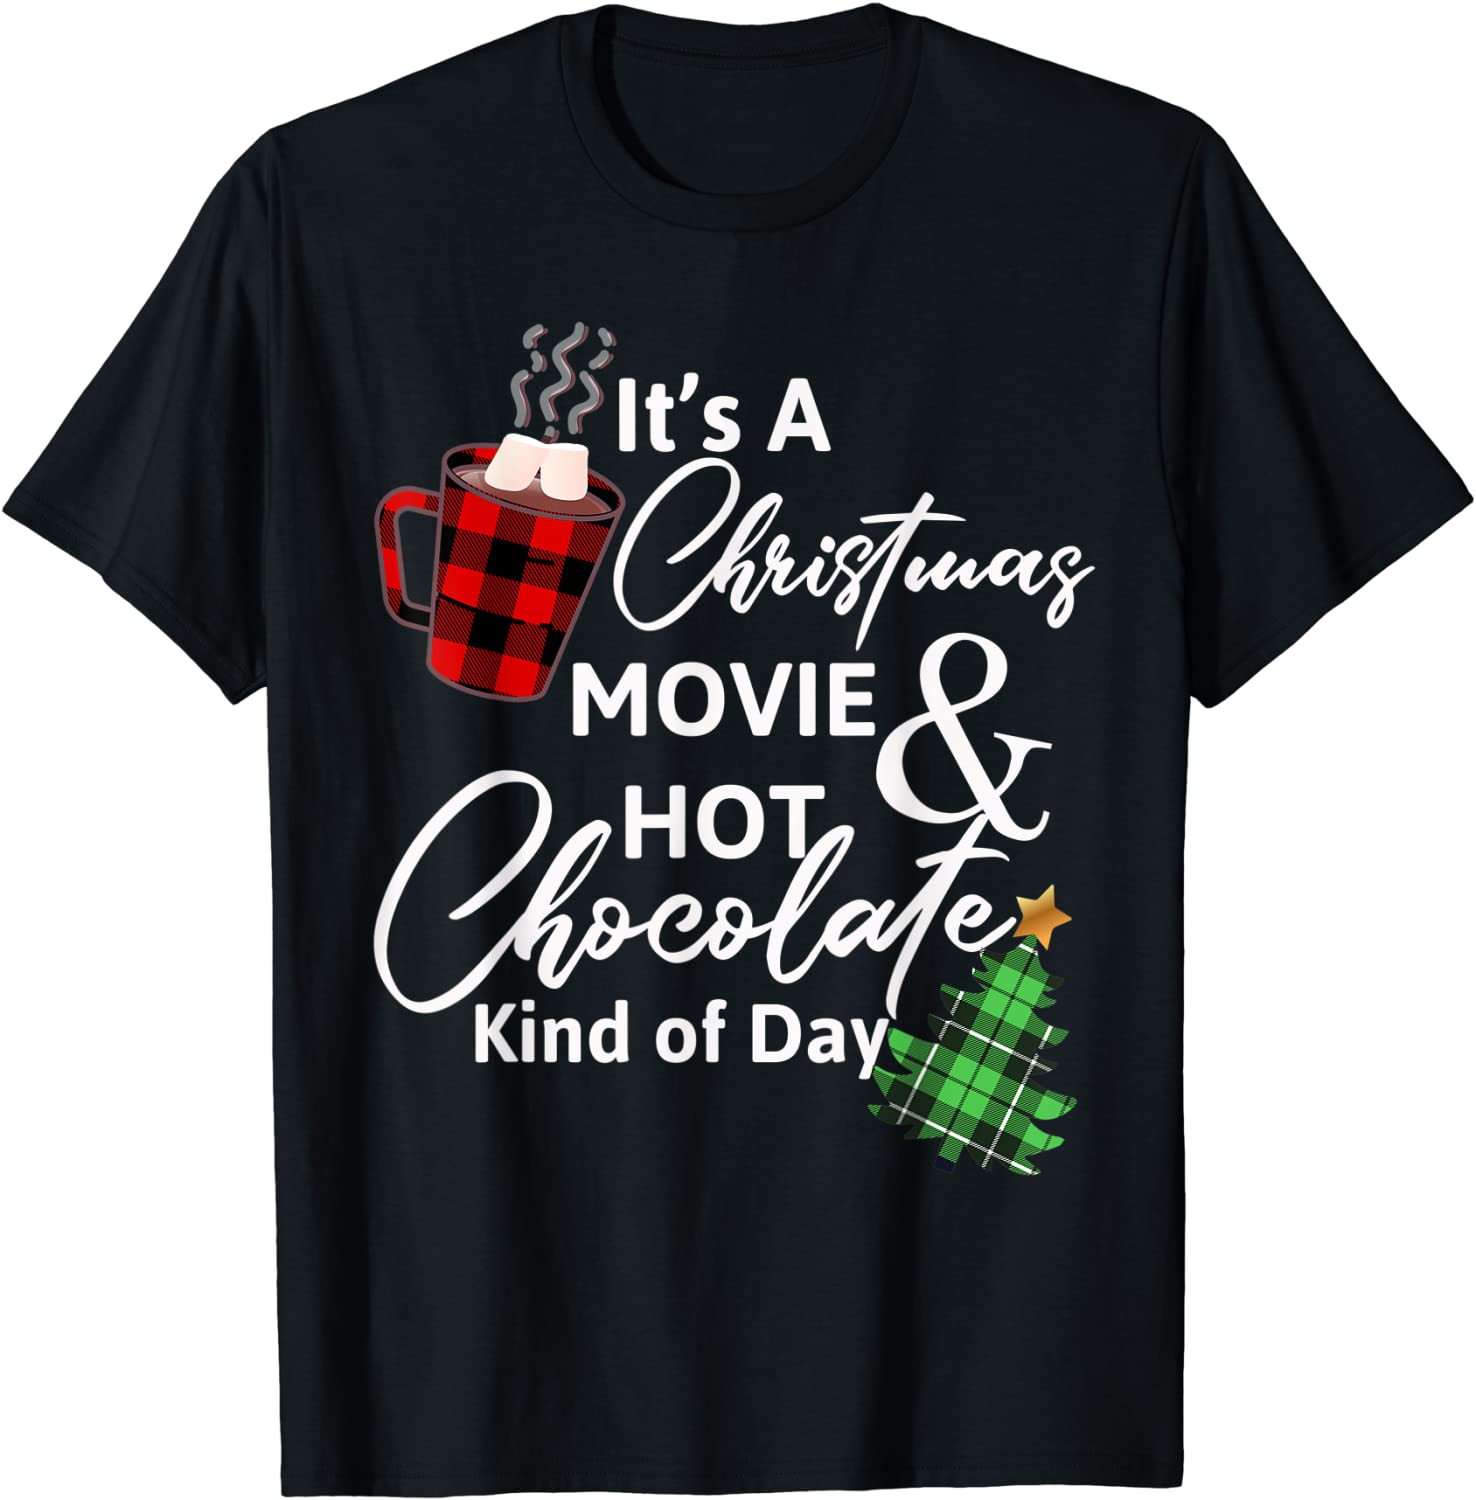 It's A Christmas Movie & Hot Chocolate Kind Of Day T-Shirt